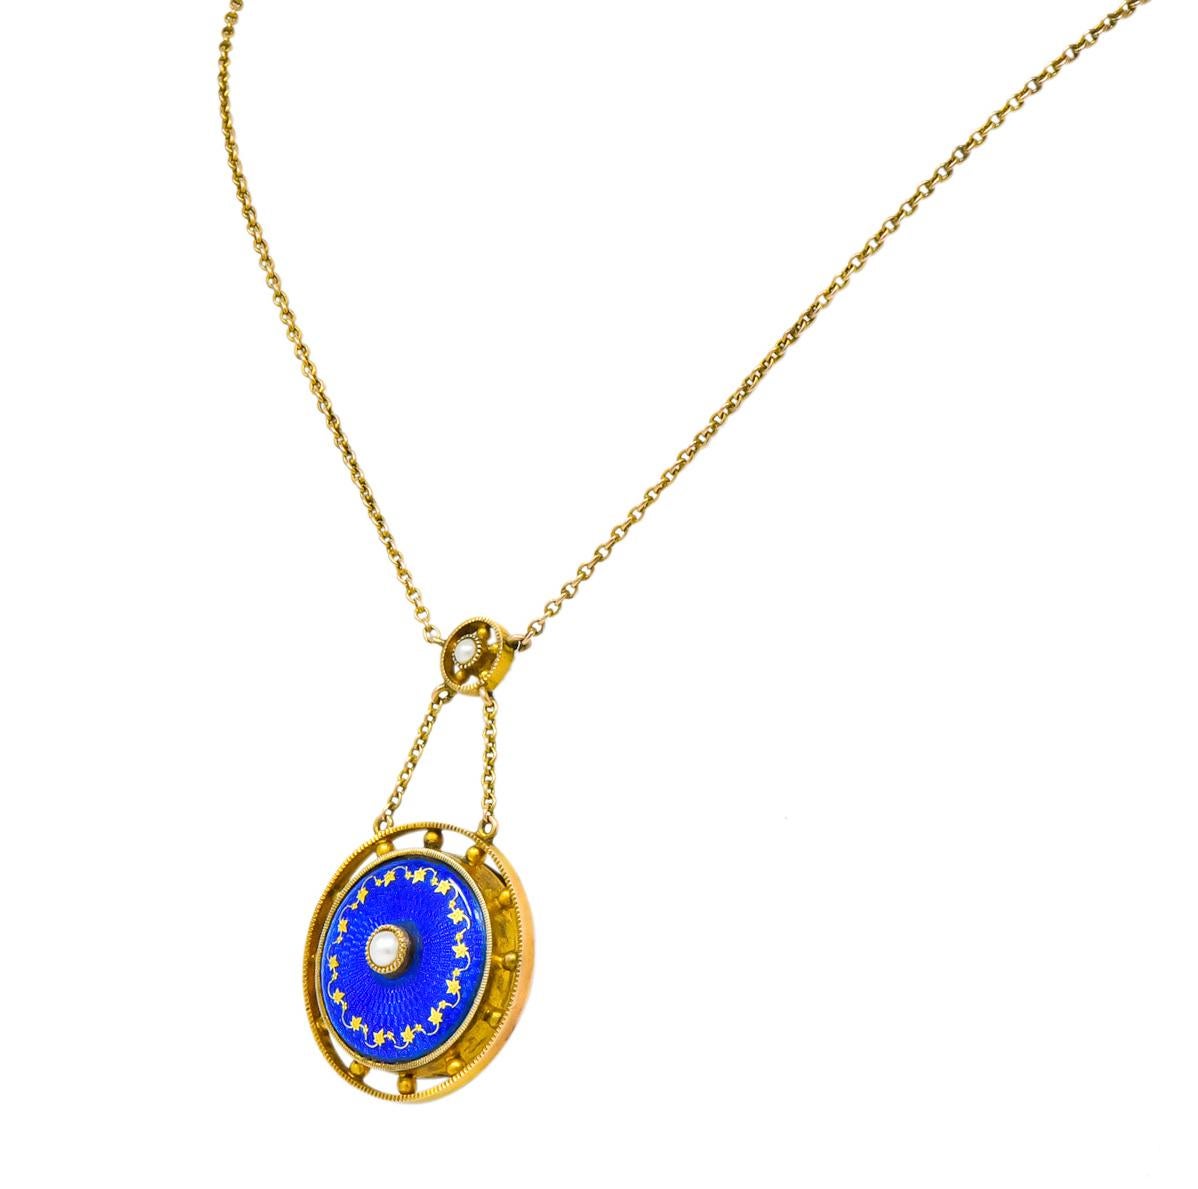 Centering a small, bezel set, round, natural freshwater pearl surrounded by radiating royal blue enamel, with no loss, and a gold ivy motif

Surrounded by inner and outer round gold millegrain frames accented with gold beads

Suspended by cable